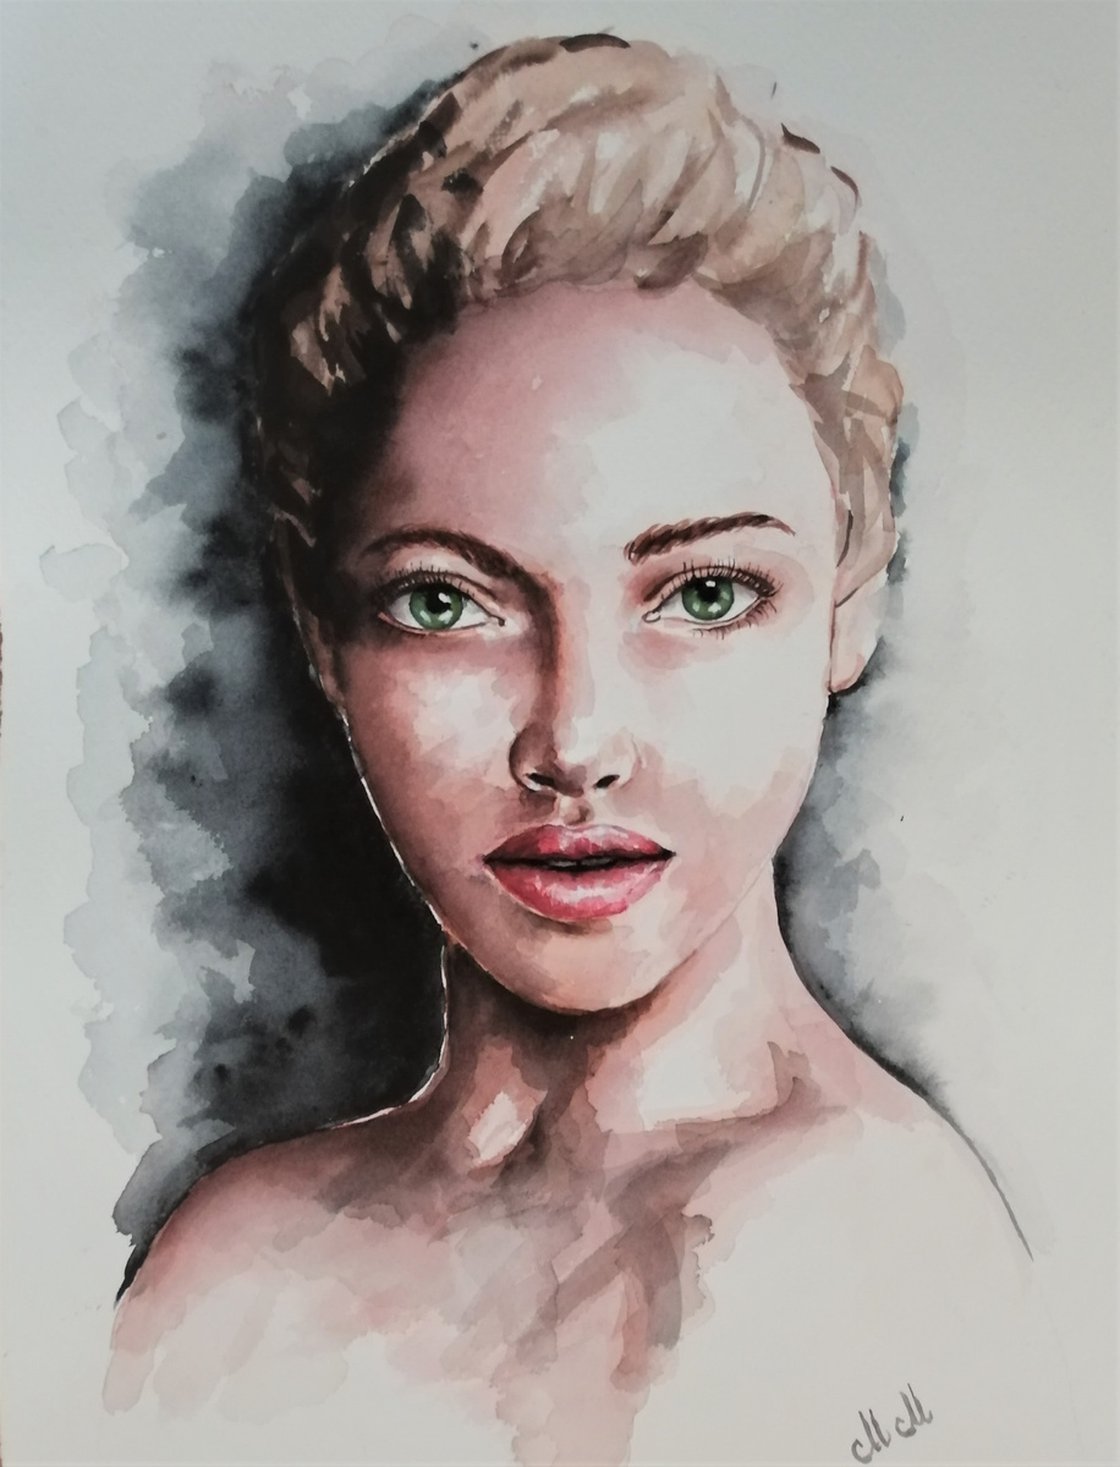 Portrait Painting in Watercolor — Book Hearted